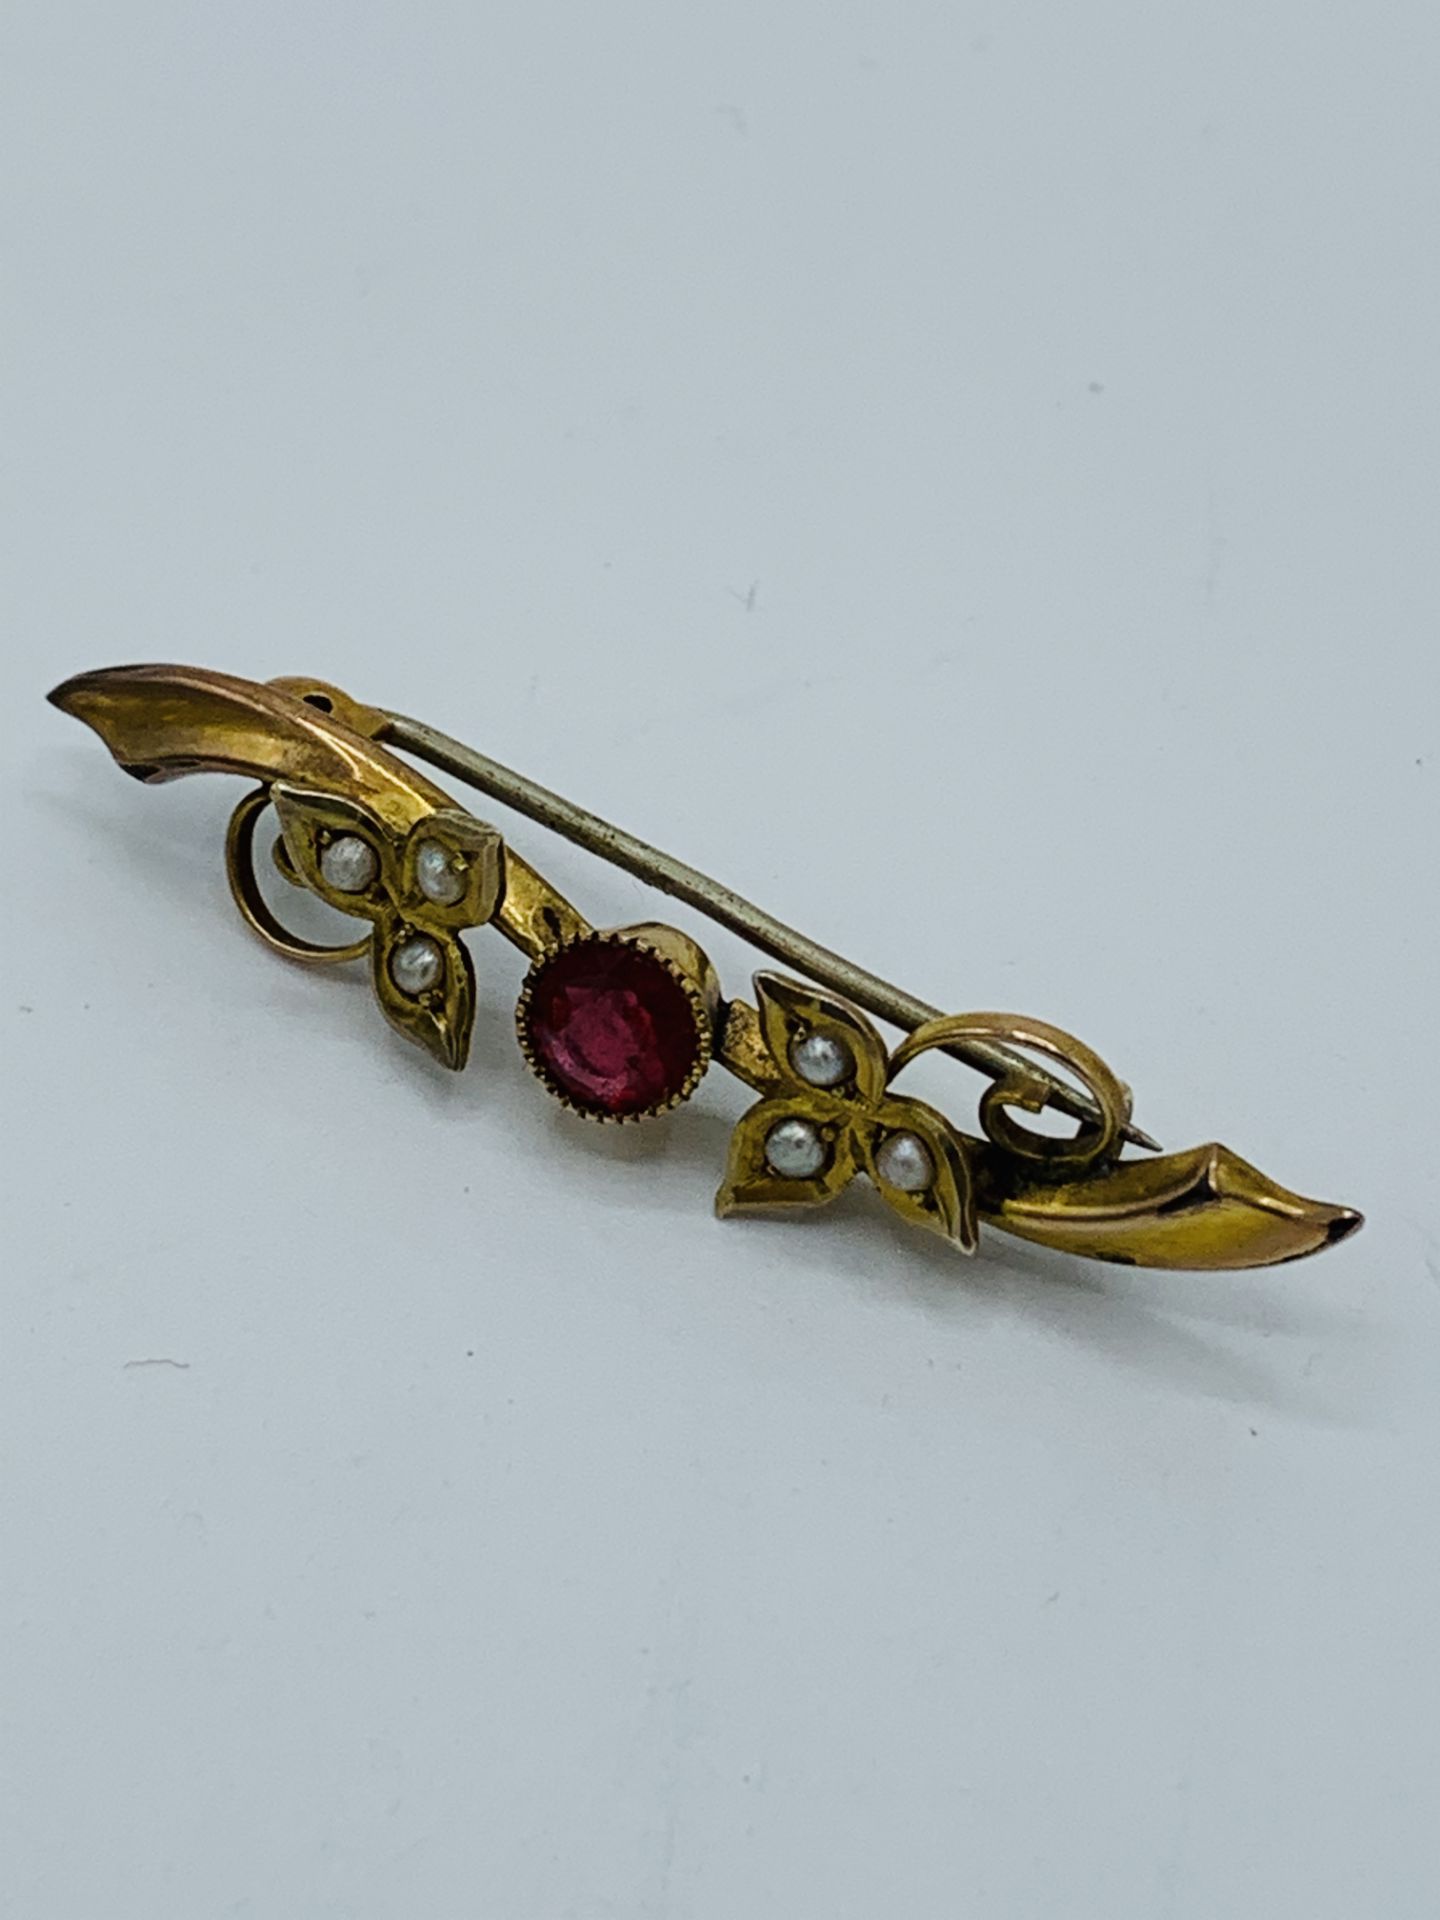 2 9ct gold antique brooches. - Image 3 of 3